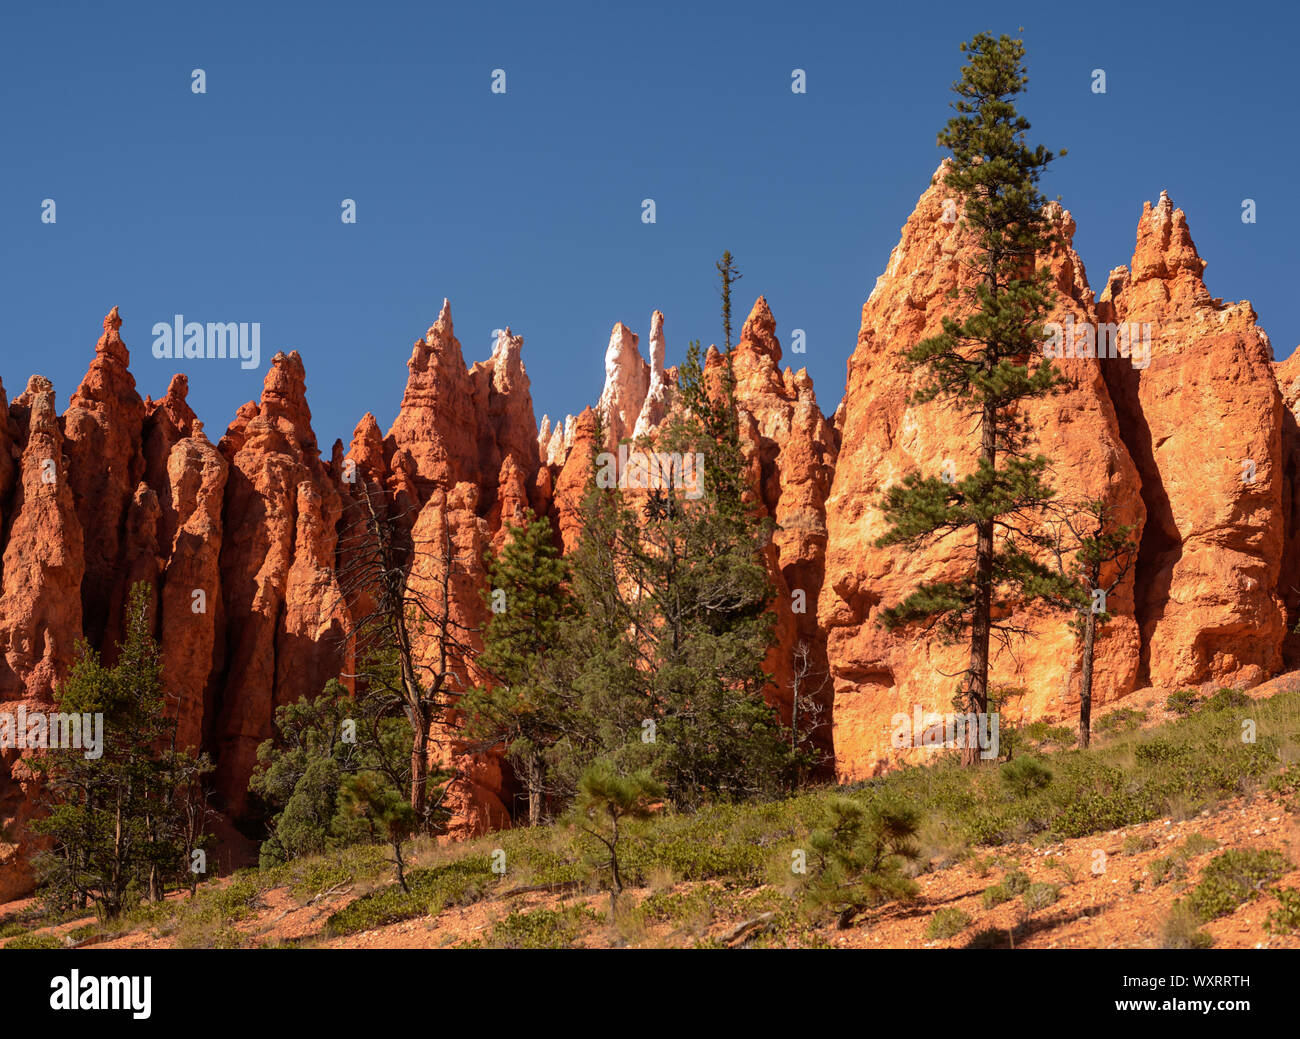 Pine tree grows among the Rock Formations which form the colorful background at Bryce Canyon National Park Stock Photo